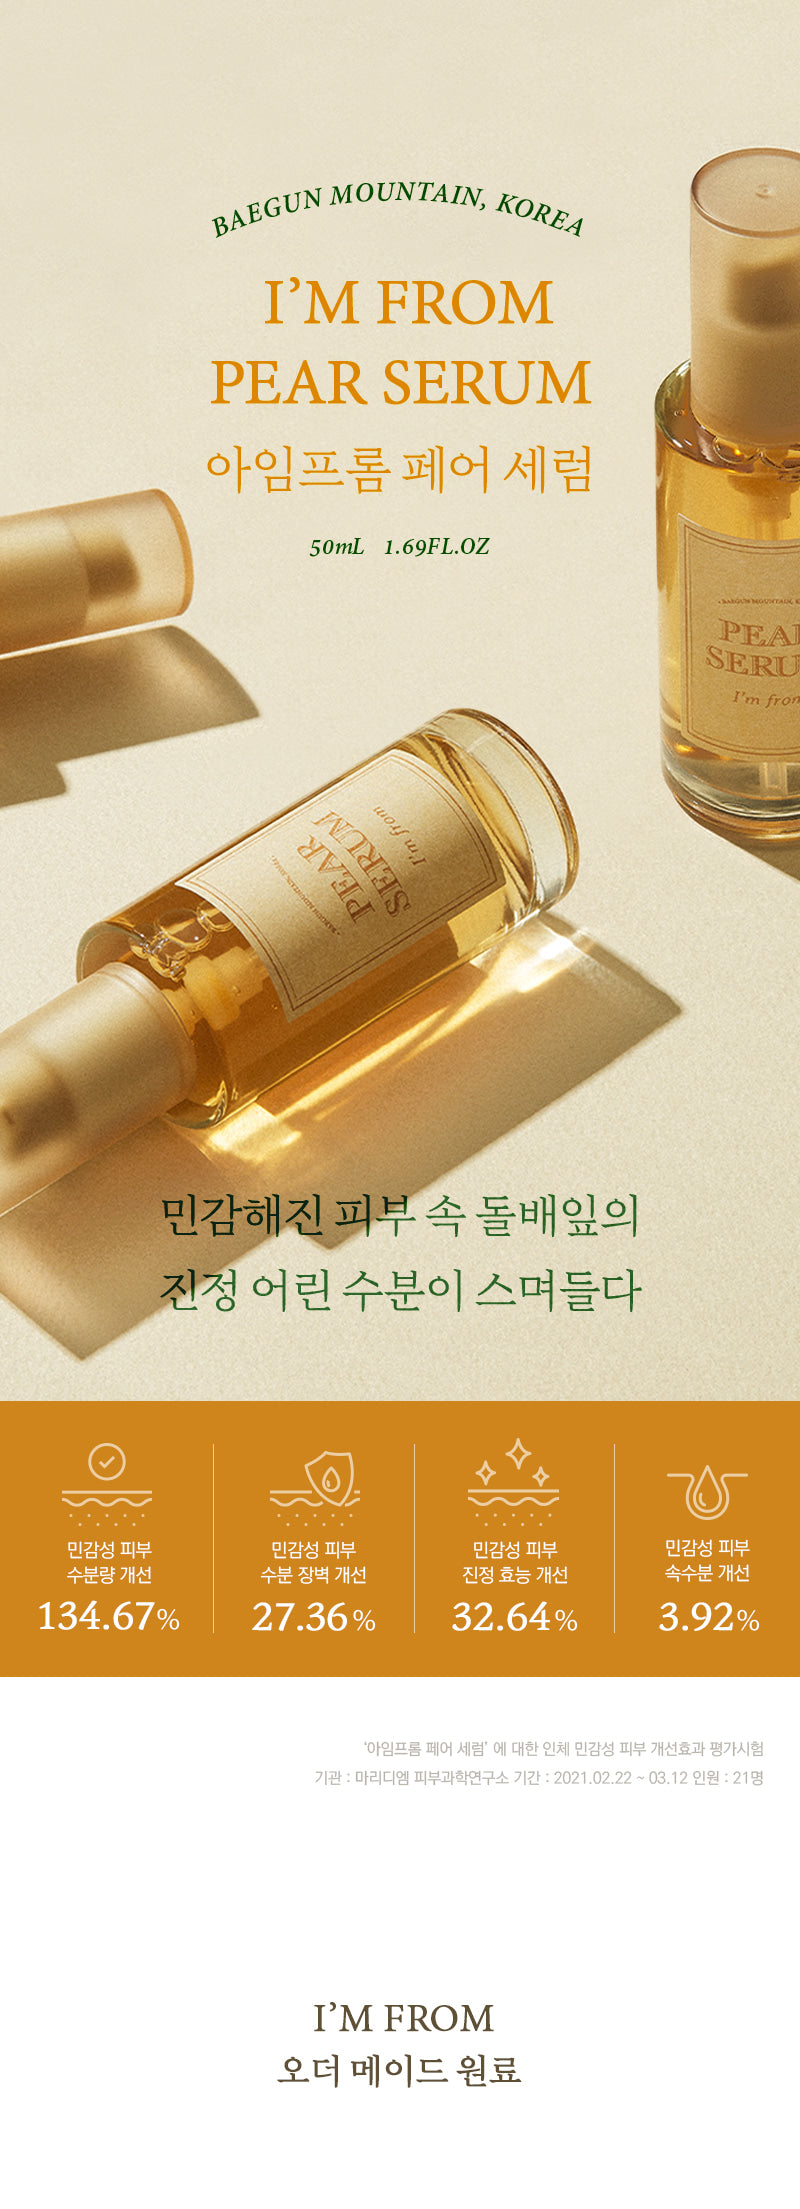 I'M FROM_Pear Serum 50ml_1